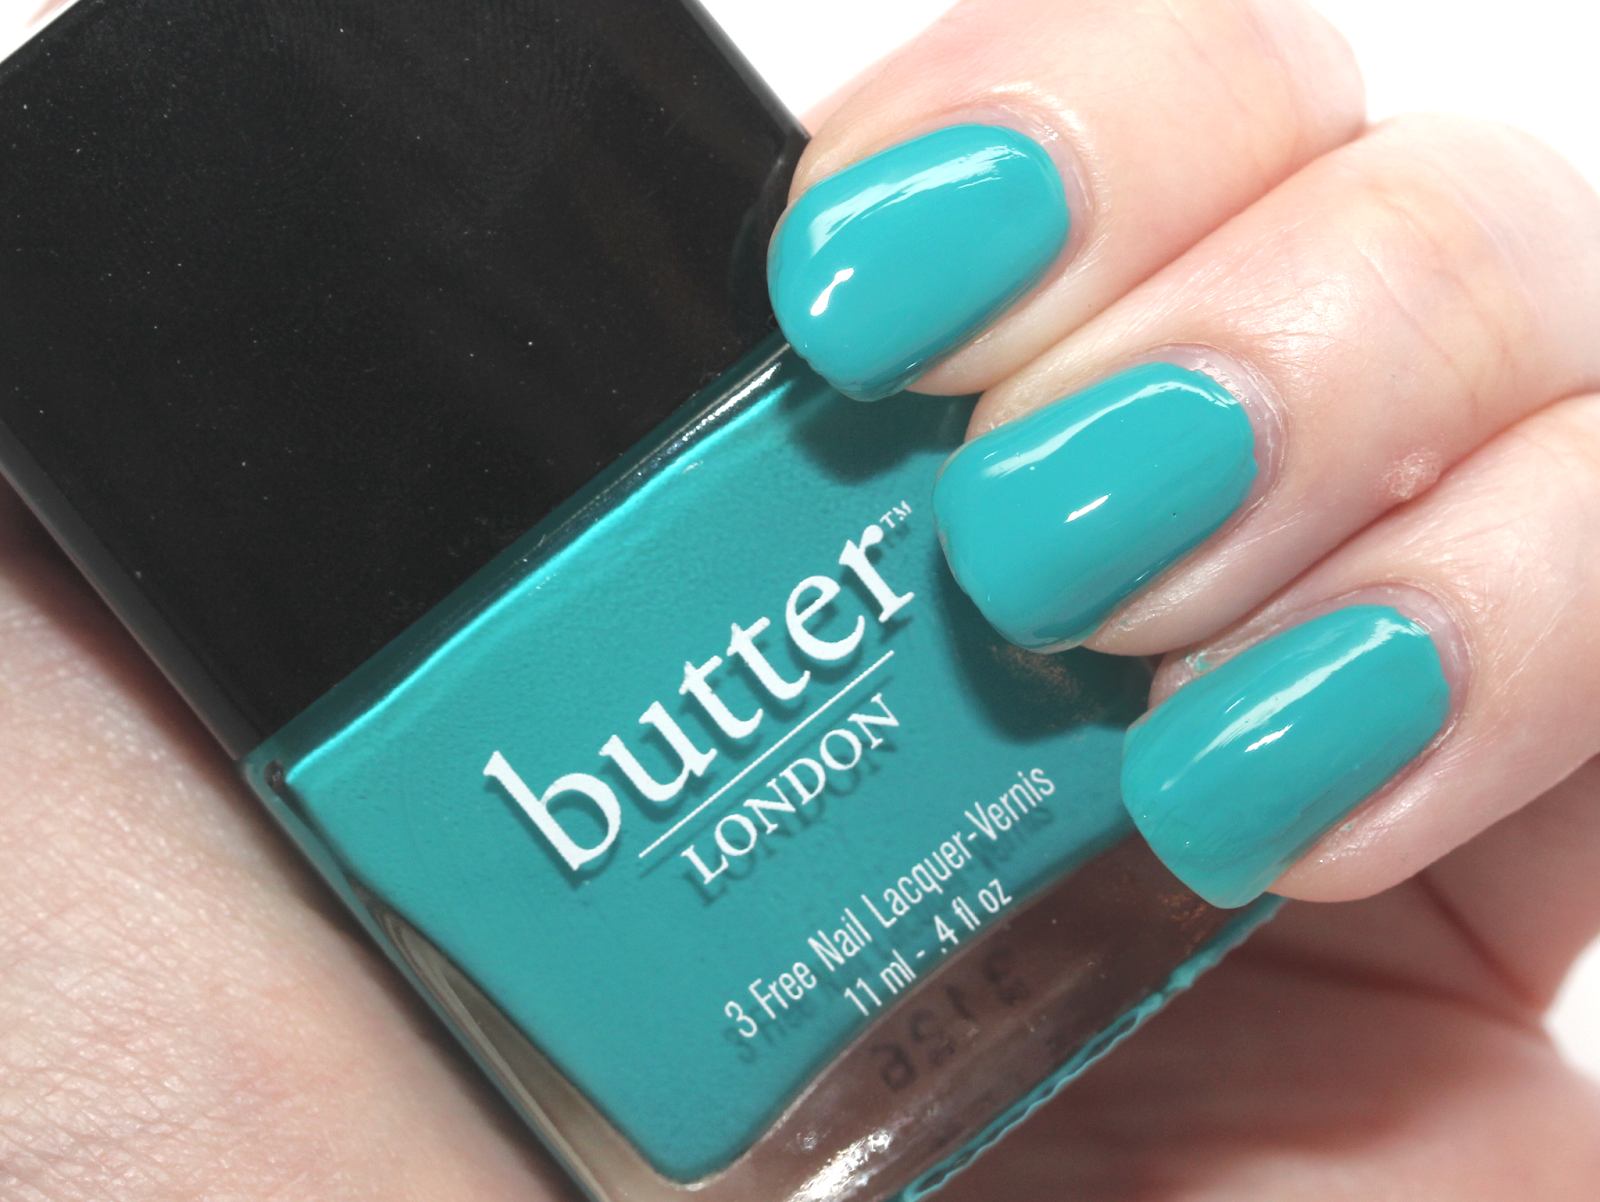 Butter London Nail Lacquer in "Hula Girl" - wide 3